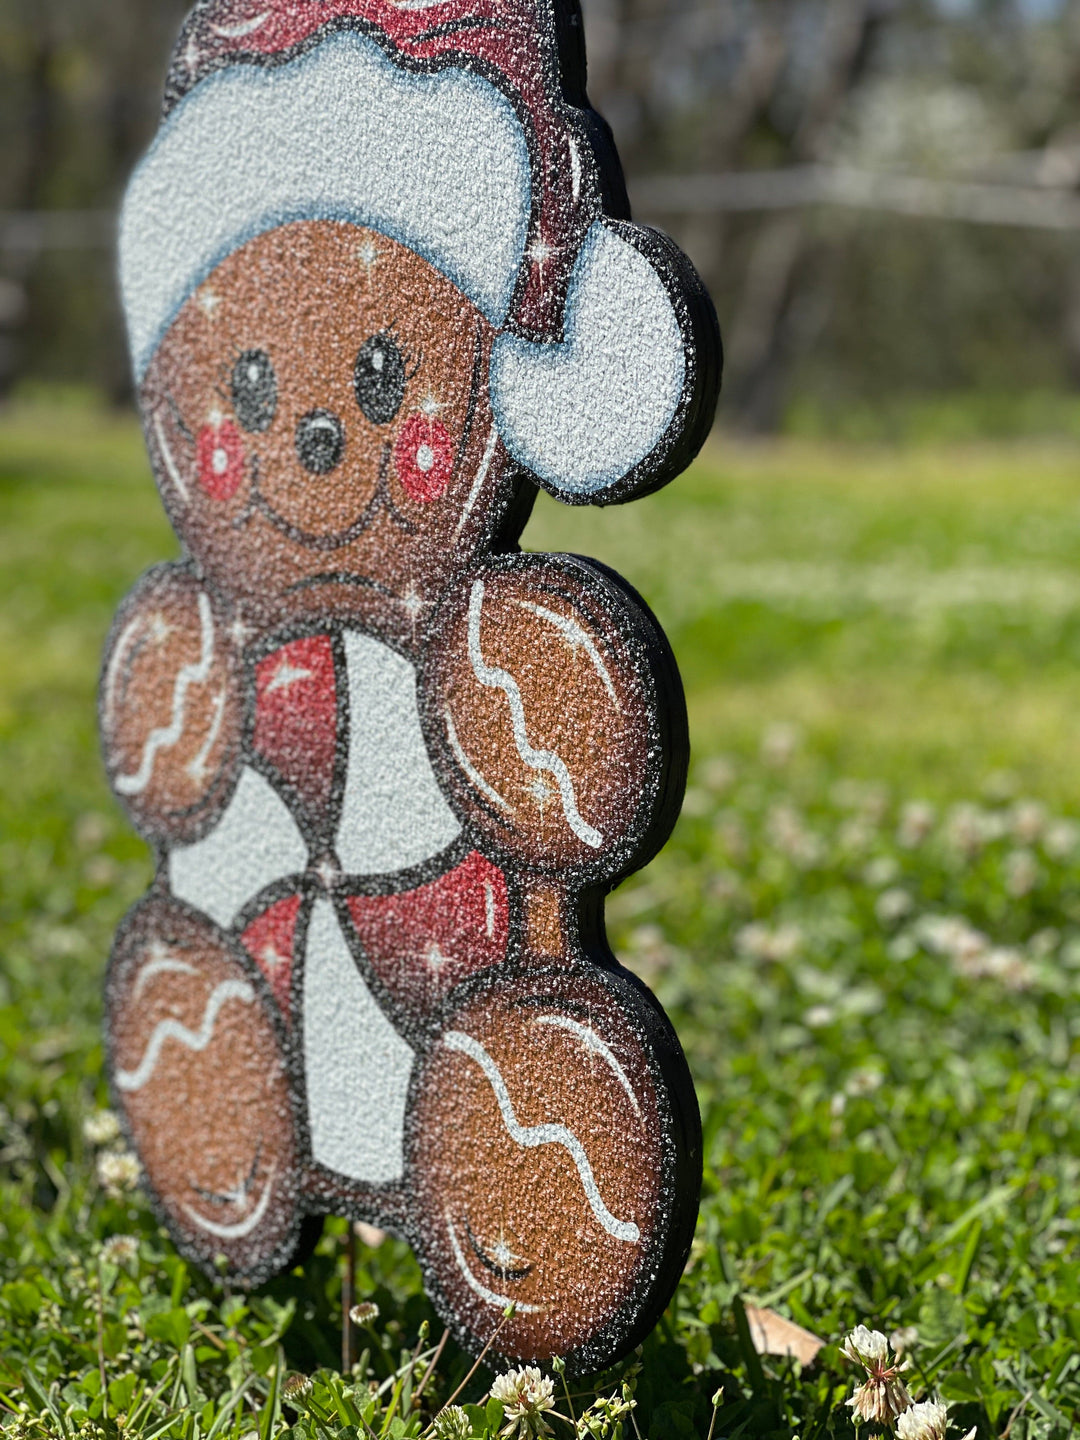 Christmas gingerbread kid with peppermint yard decor